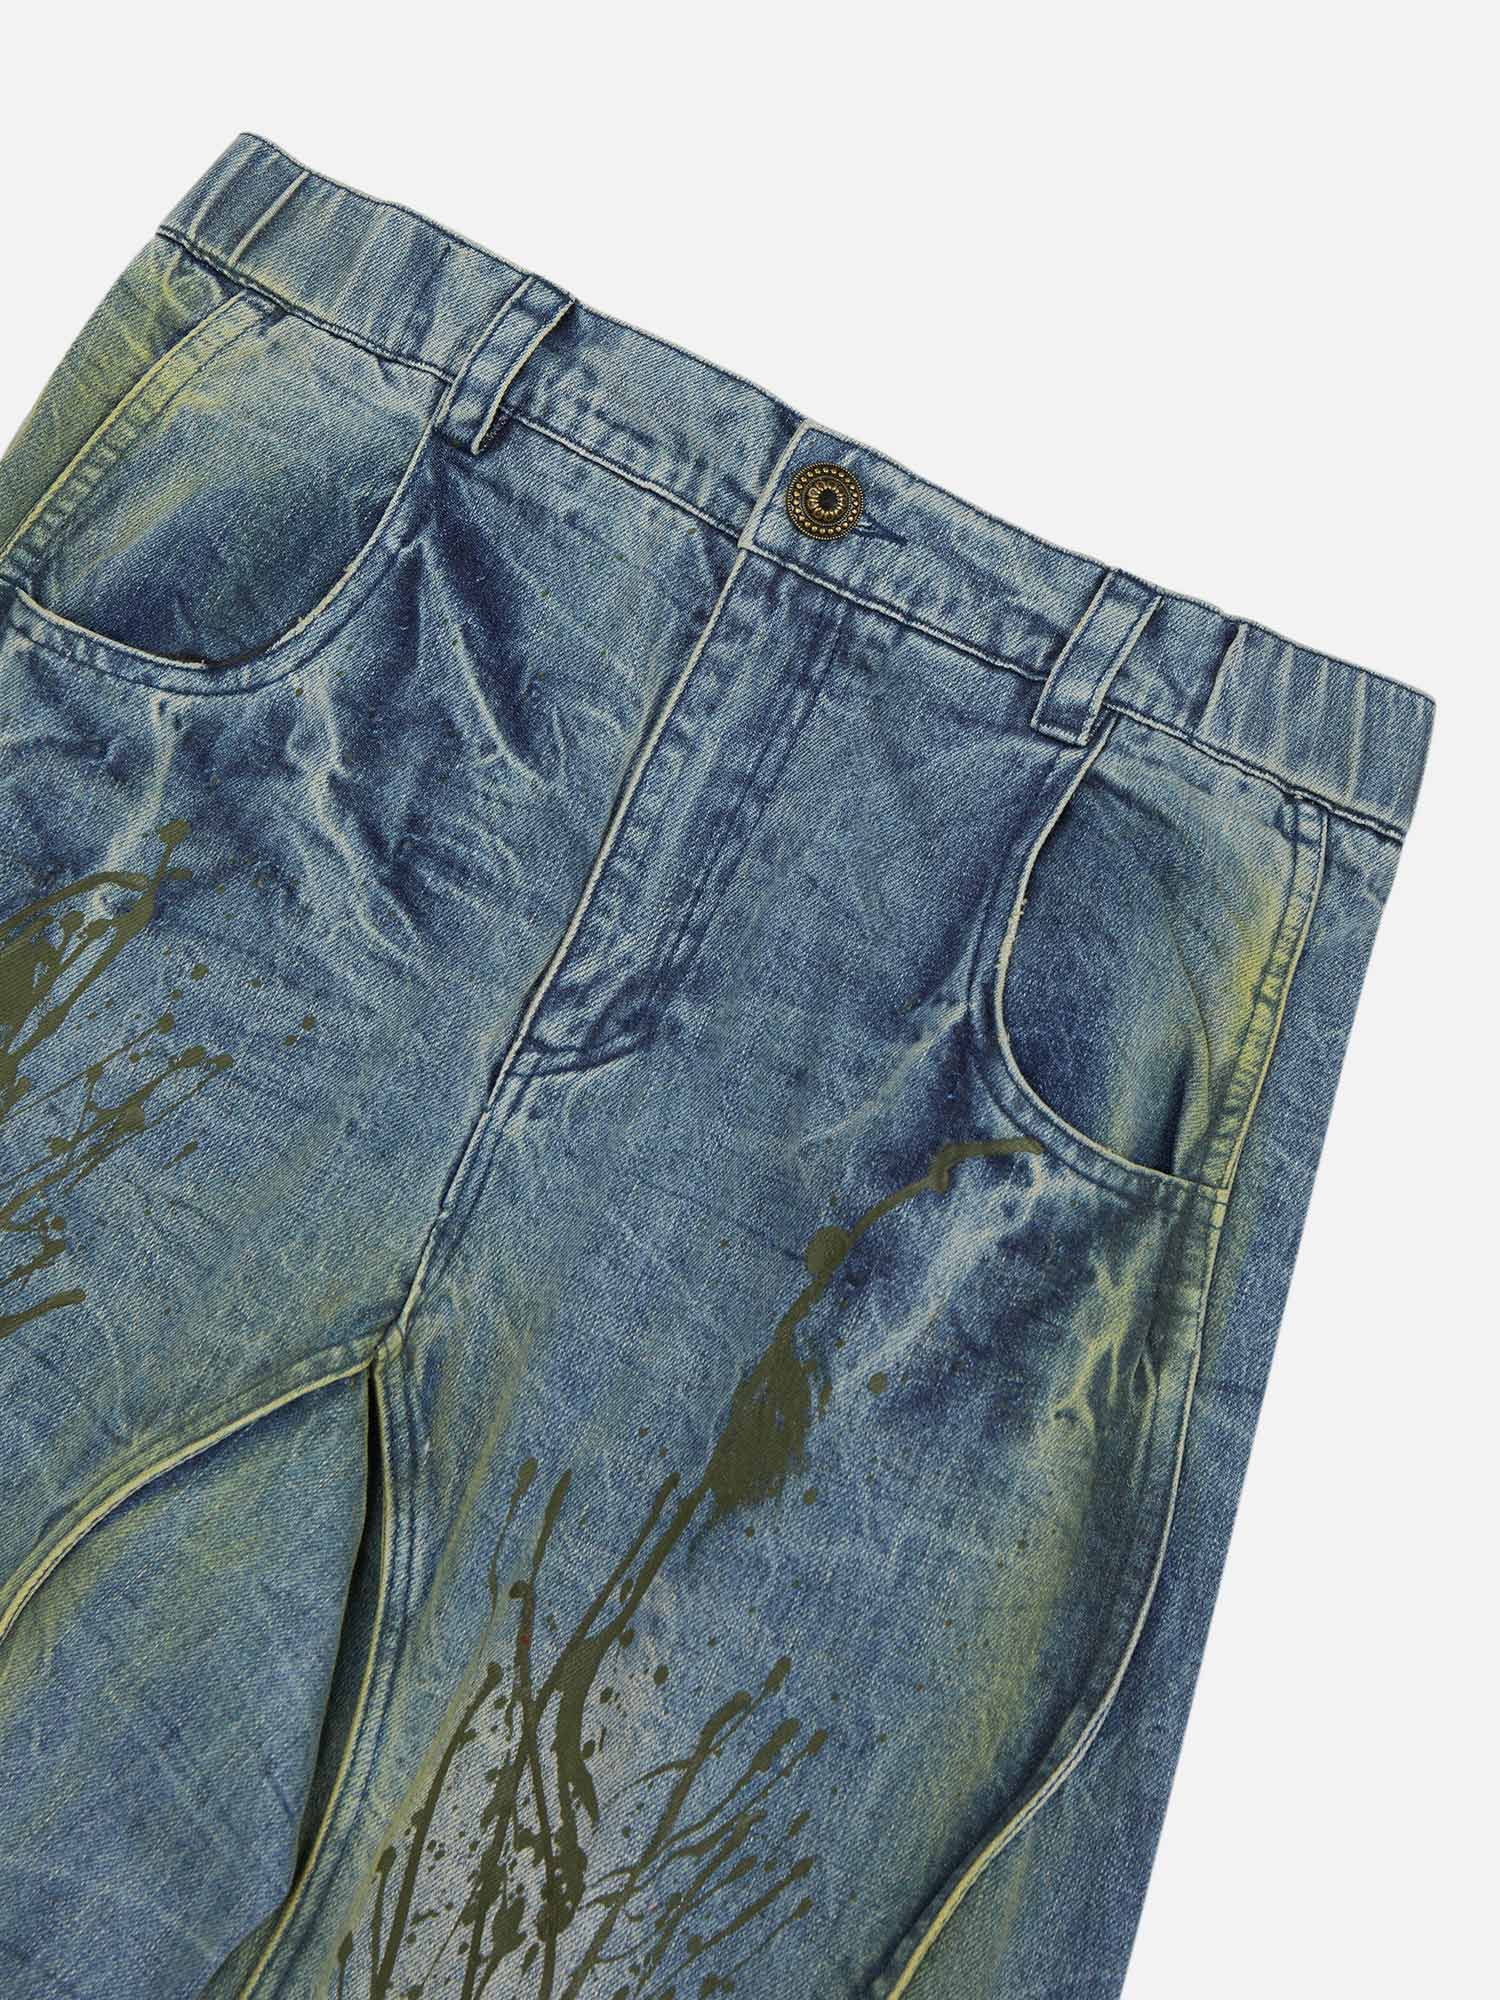 American Street Heavy Duty Washed Distressed Jeans - 2033